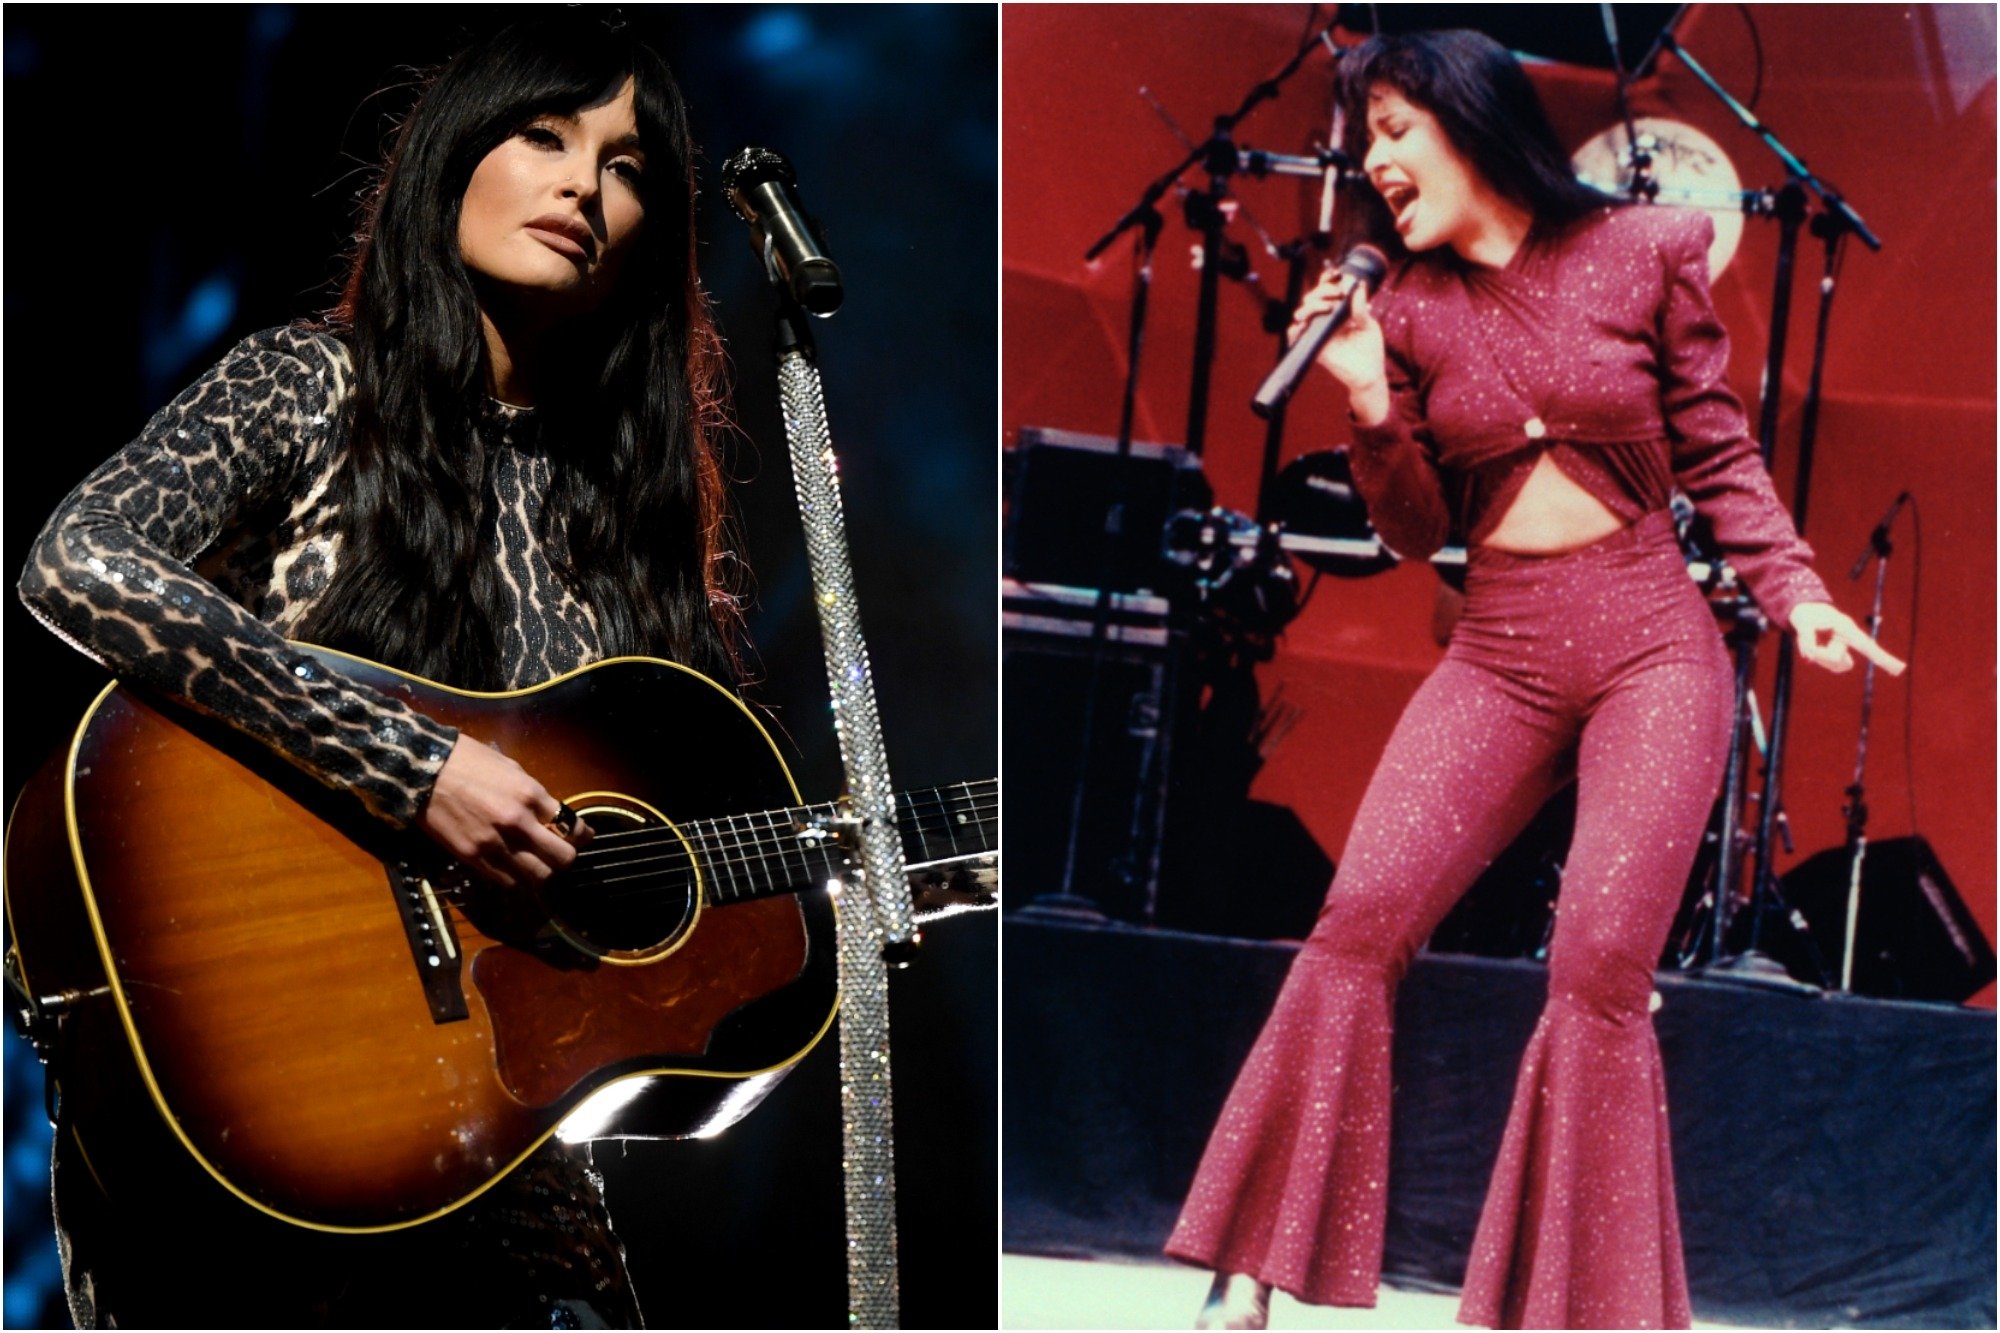 Kacey Musgraves and Selena Quintanilla Did 1 Similar Thing With Their Music, The Country Singer Said